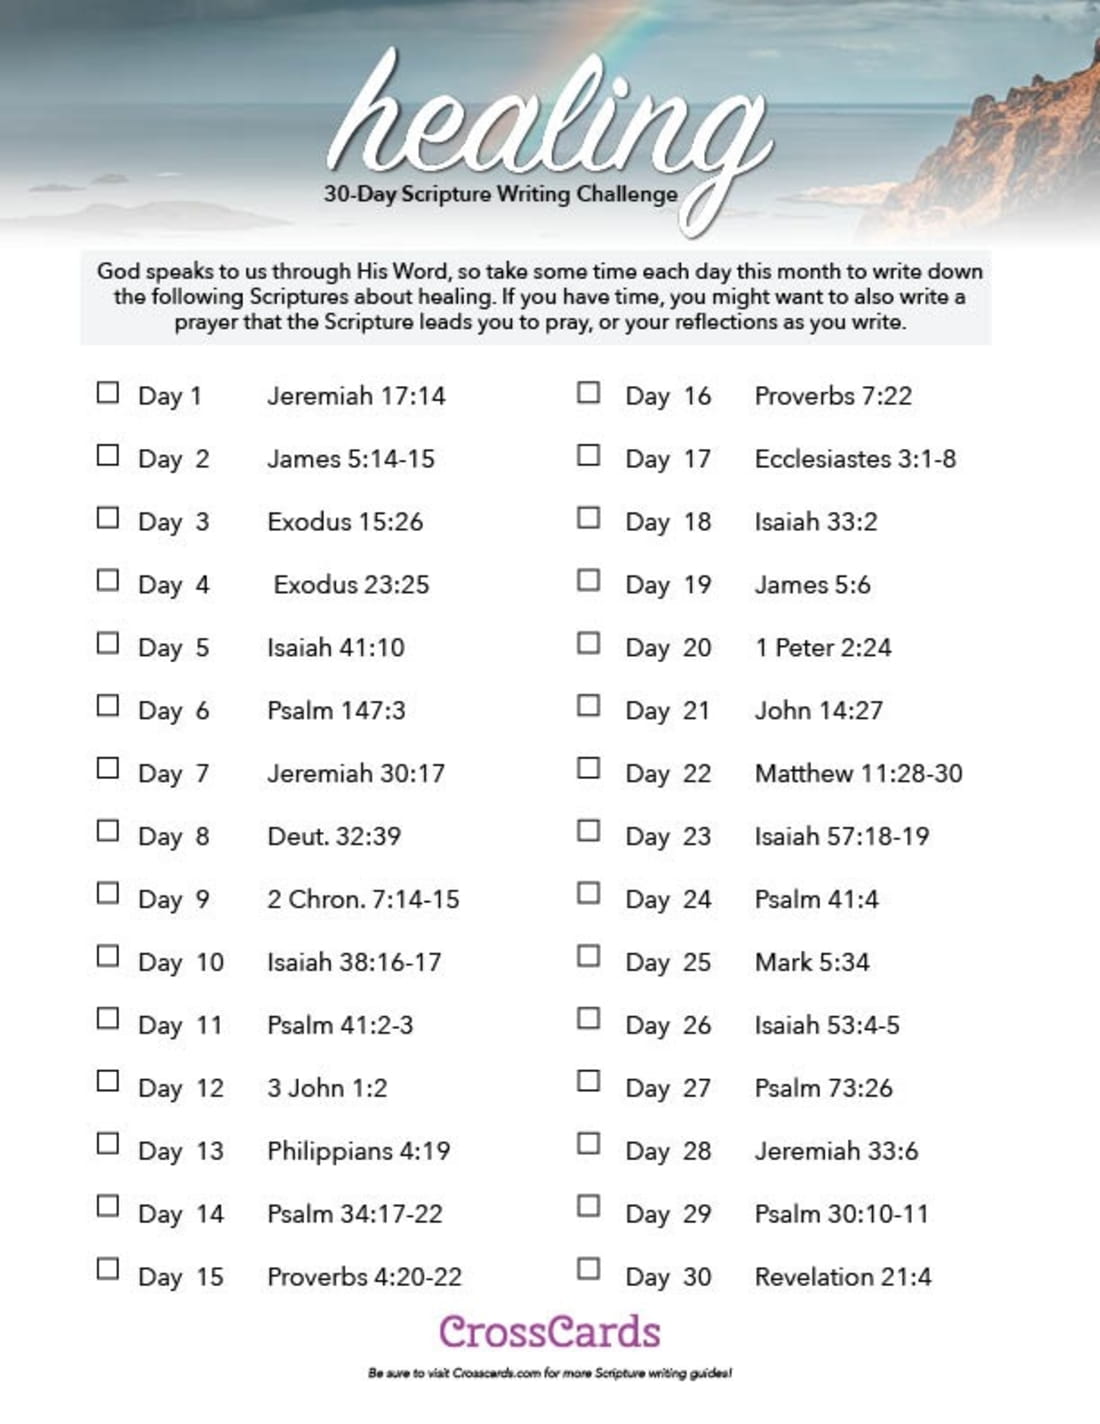 30-Day Scripture Writing Challenge for Healing